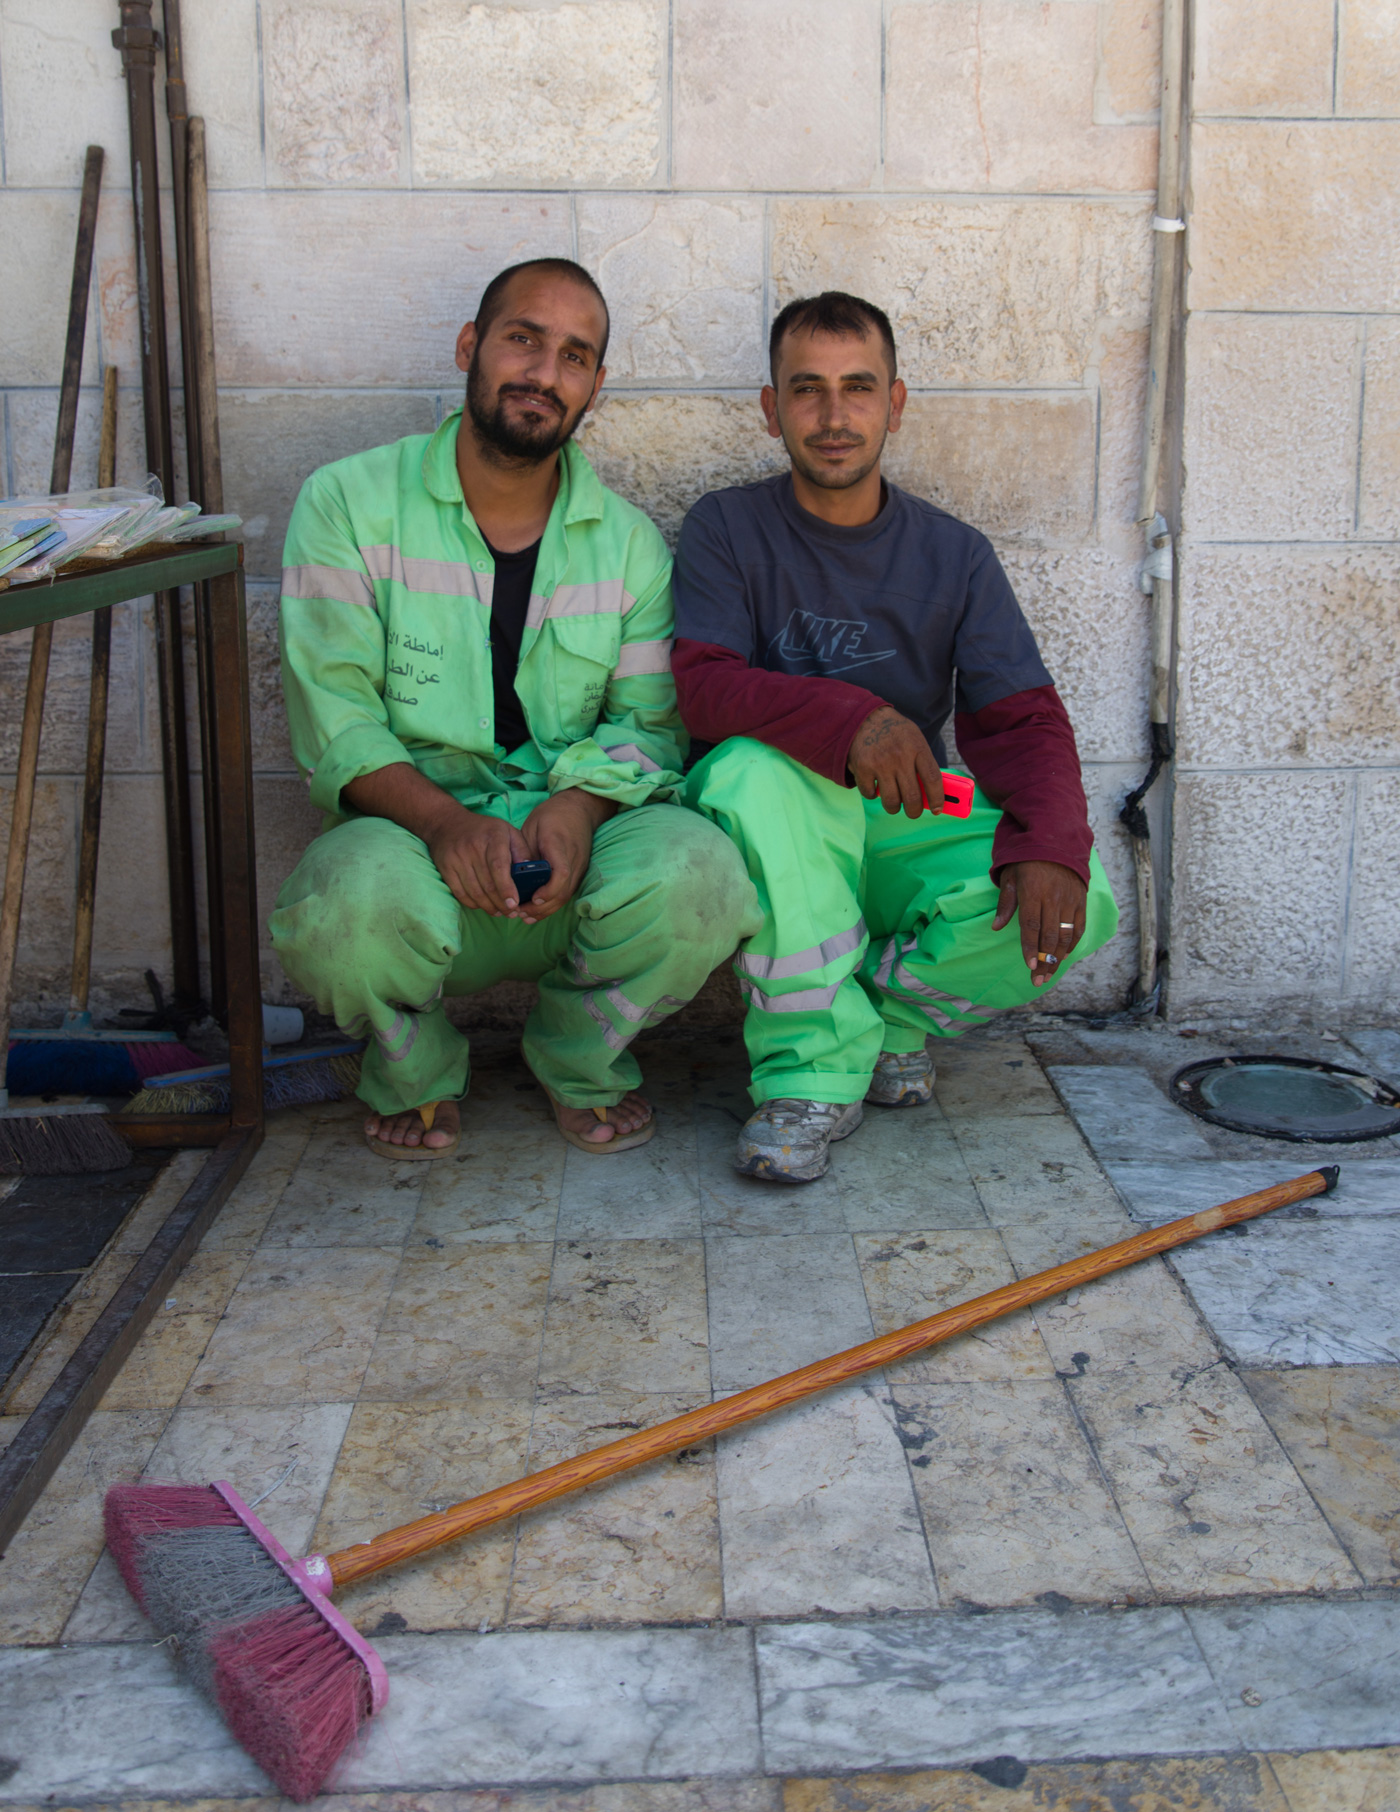 Cleaners in Amman outside the Grand Husseini Mosque. Some Jordanians say they would prefer to steal than clean streets.